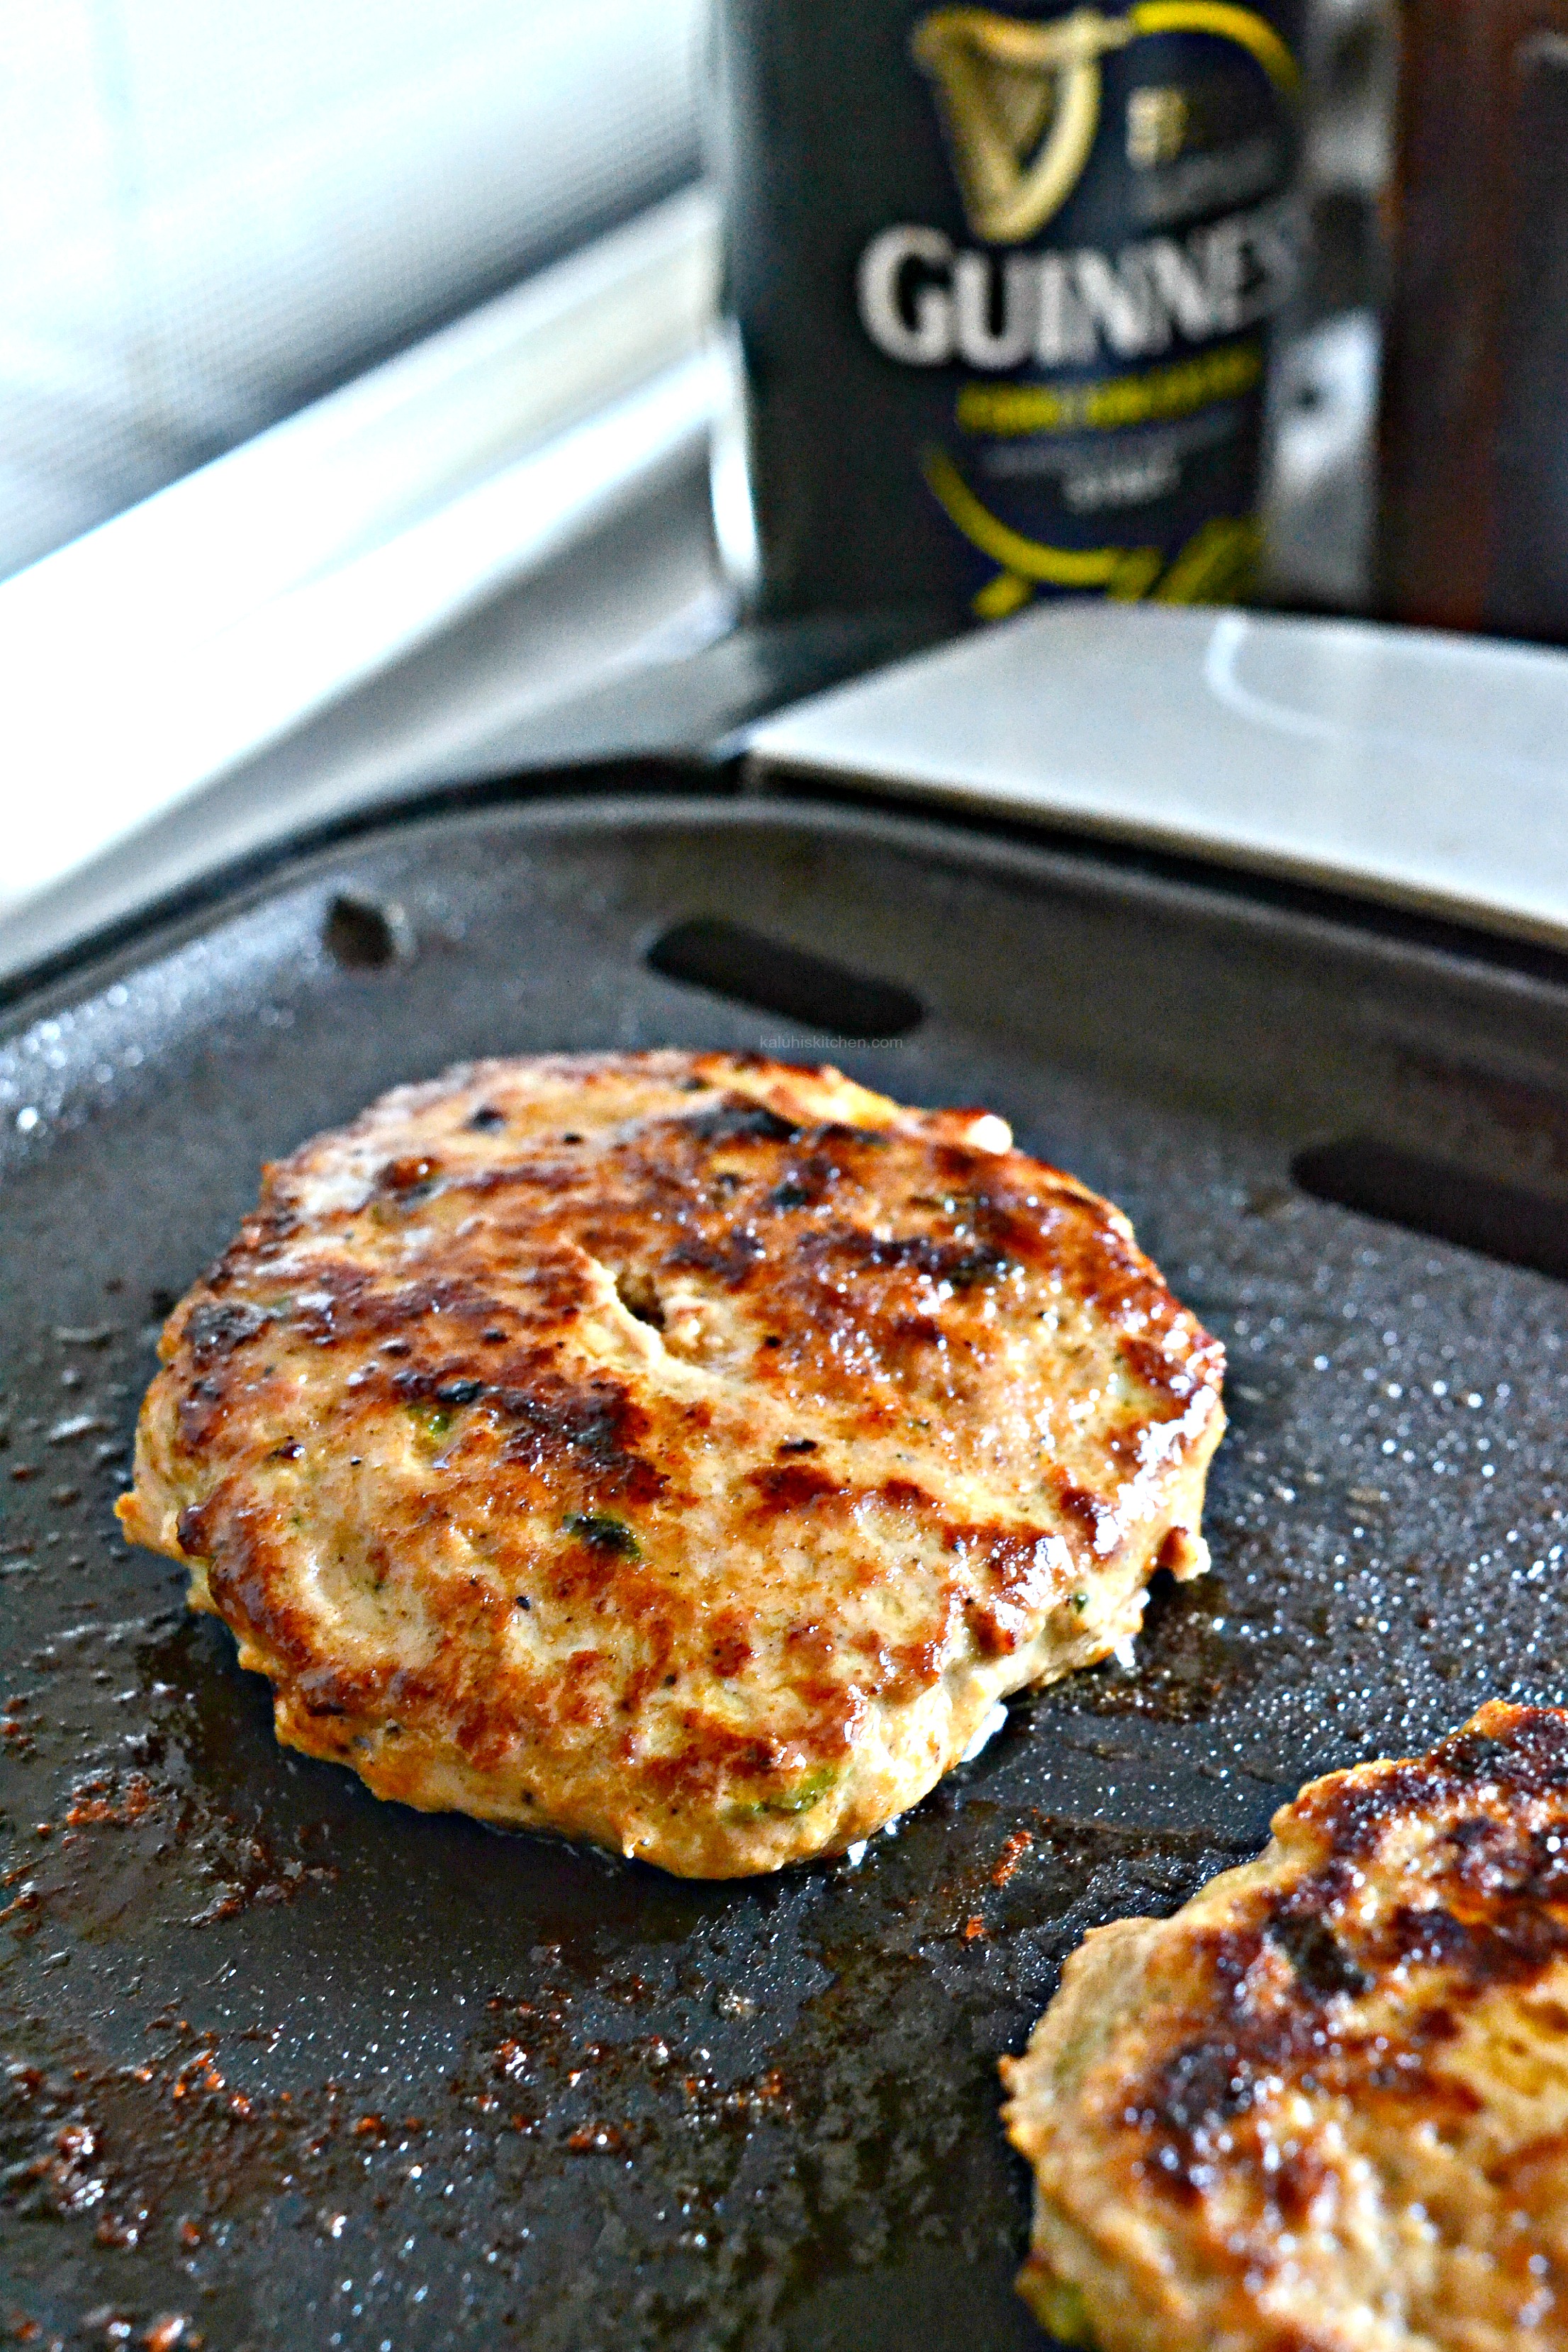 cook-the-chicken-patties-until-they-are-just-cooked-through-it-will-take-5-minutes-roughly-and-cook-through-evenly-pretty-fast_kaluhiskitchen-com